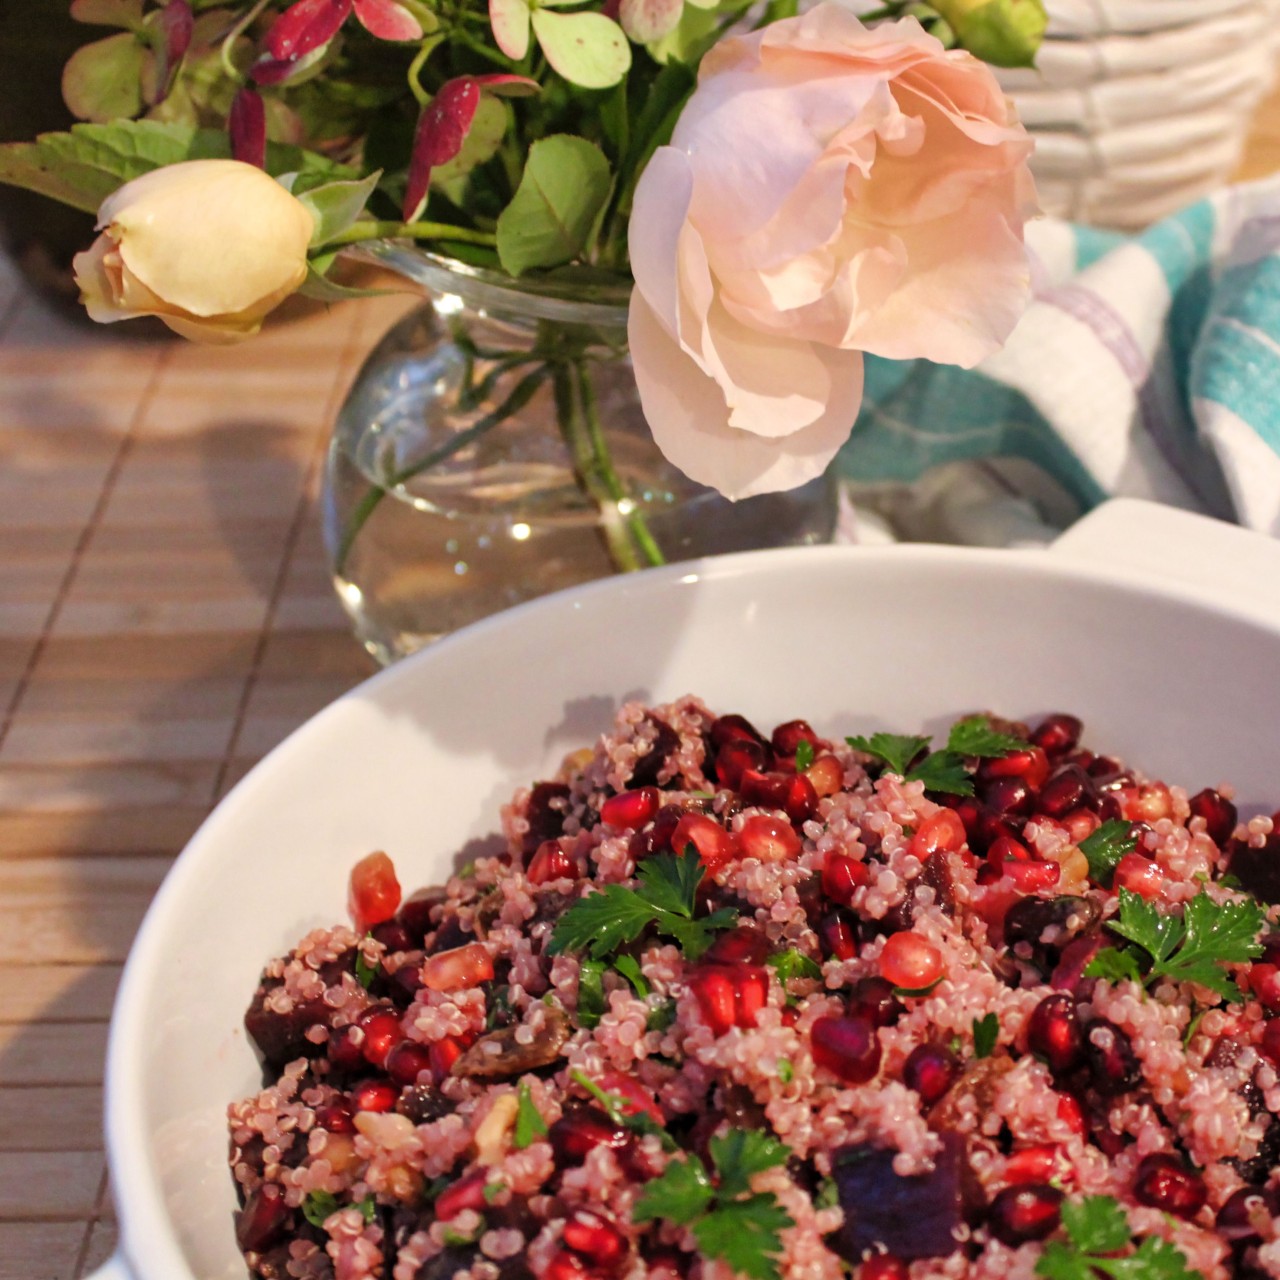 Salad with Quinoa
Combine the quinoa with beetroot, pomegranate seeds and a few other ingredients and enjoy this delicious salad.
The recipe by Tastes of Health